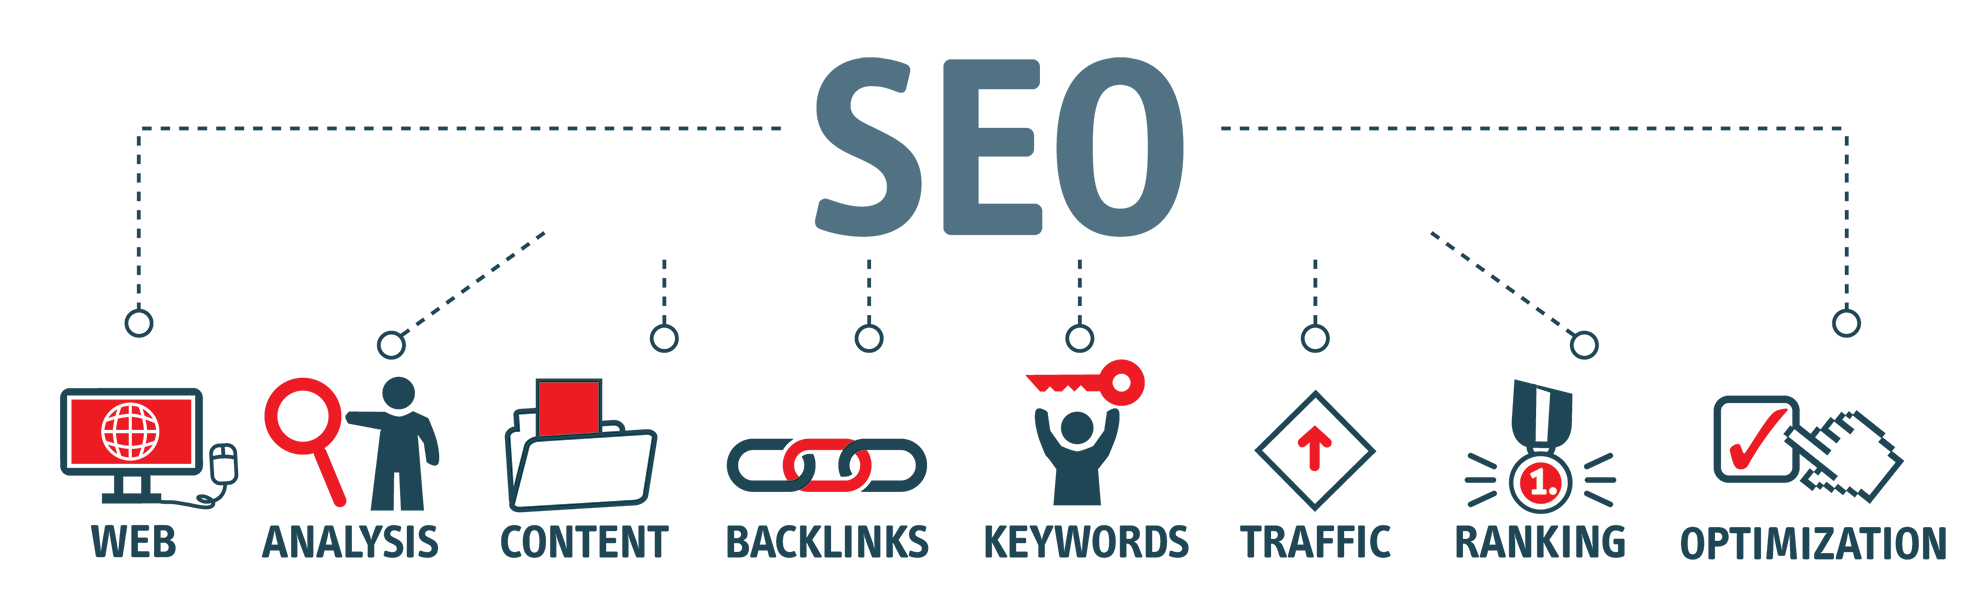 SEO Packages from the #1 SEO company, achieve top rankings with Digital Hive